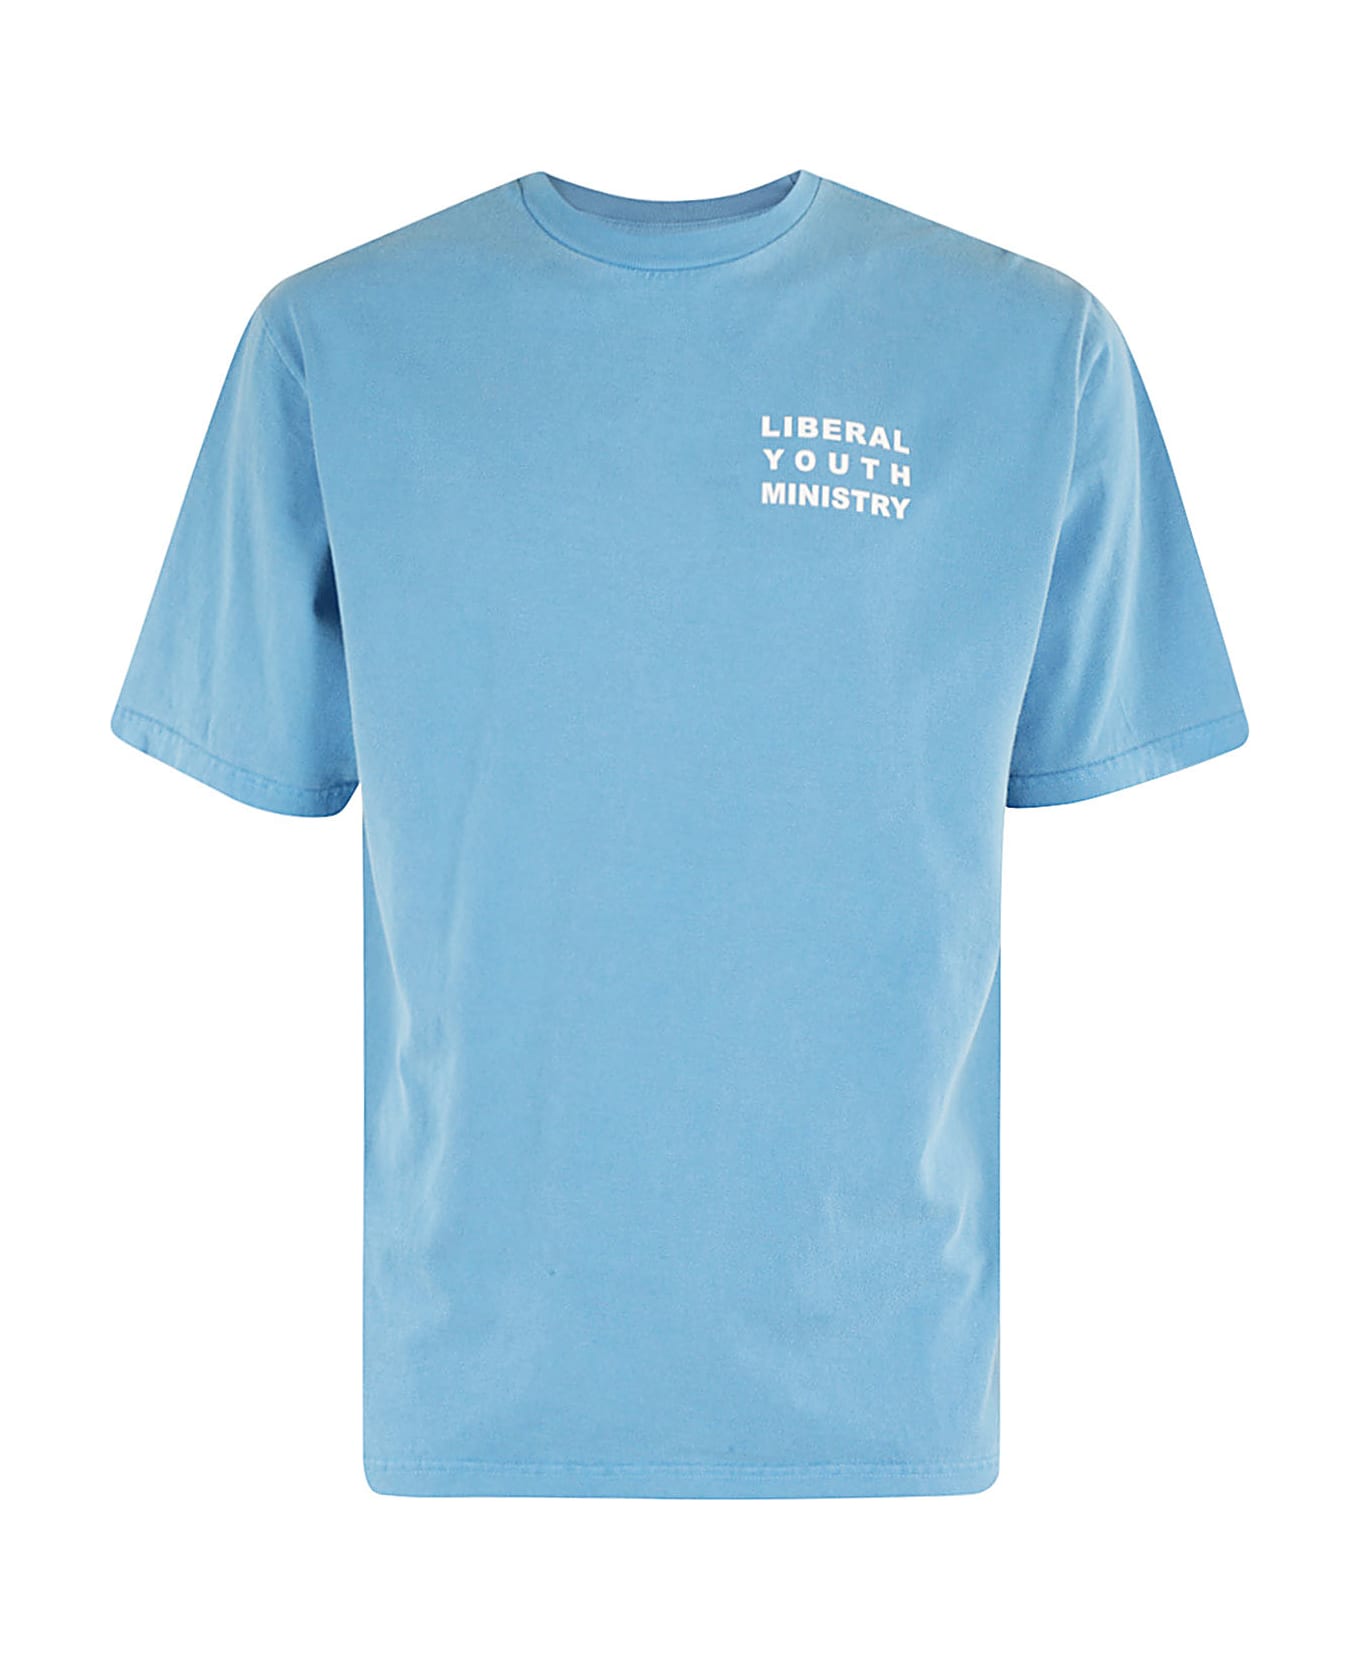 Liberal Youth Ministry Lym Logo - Blue 